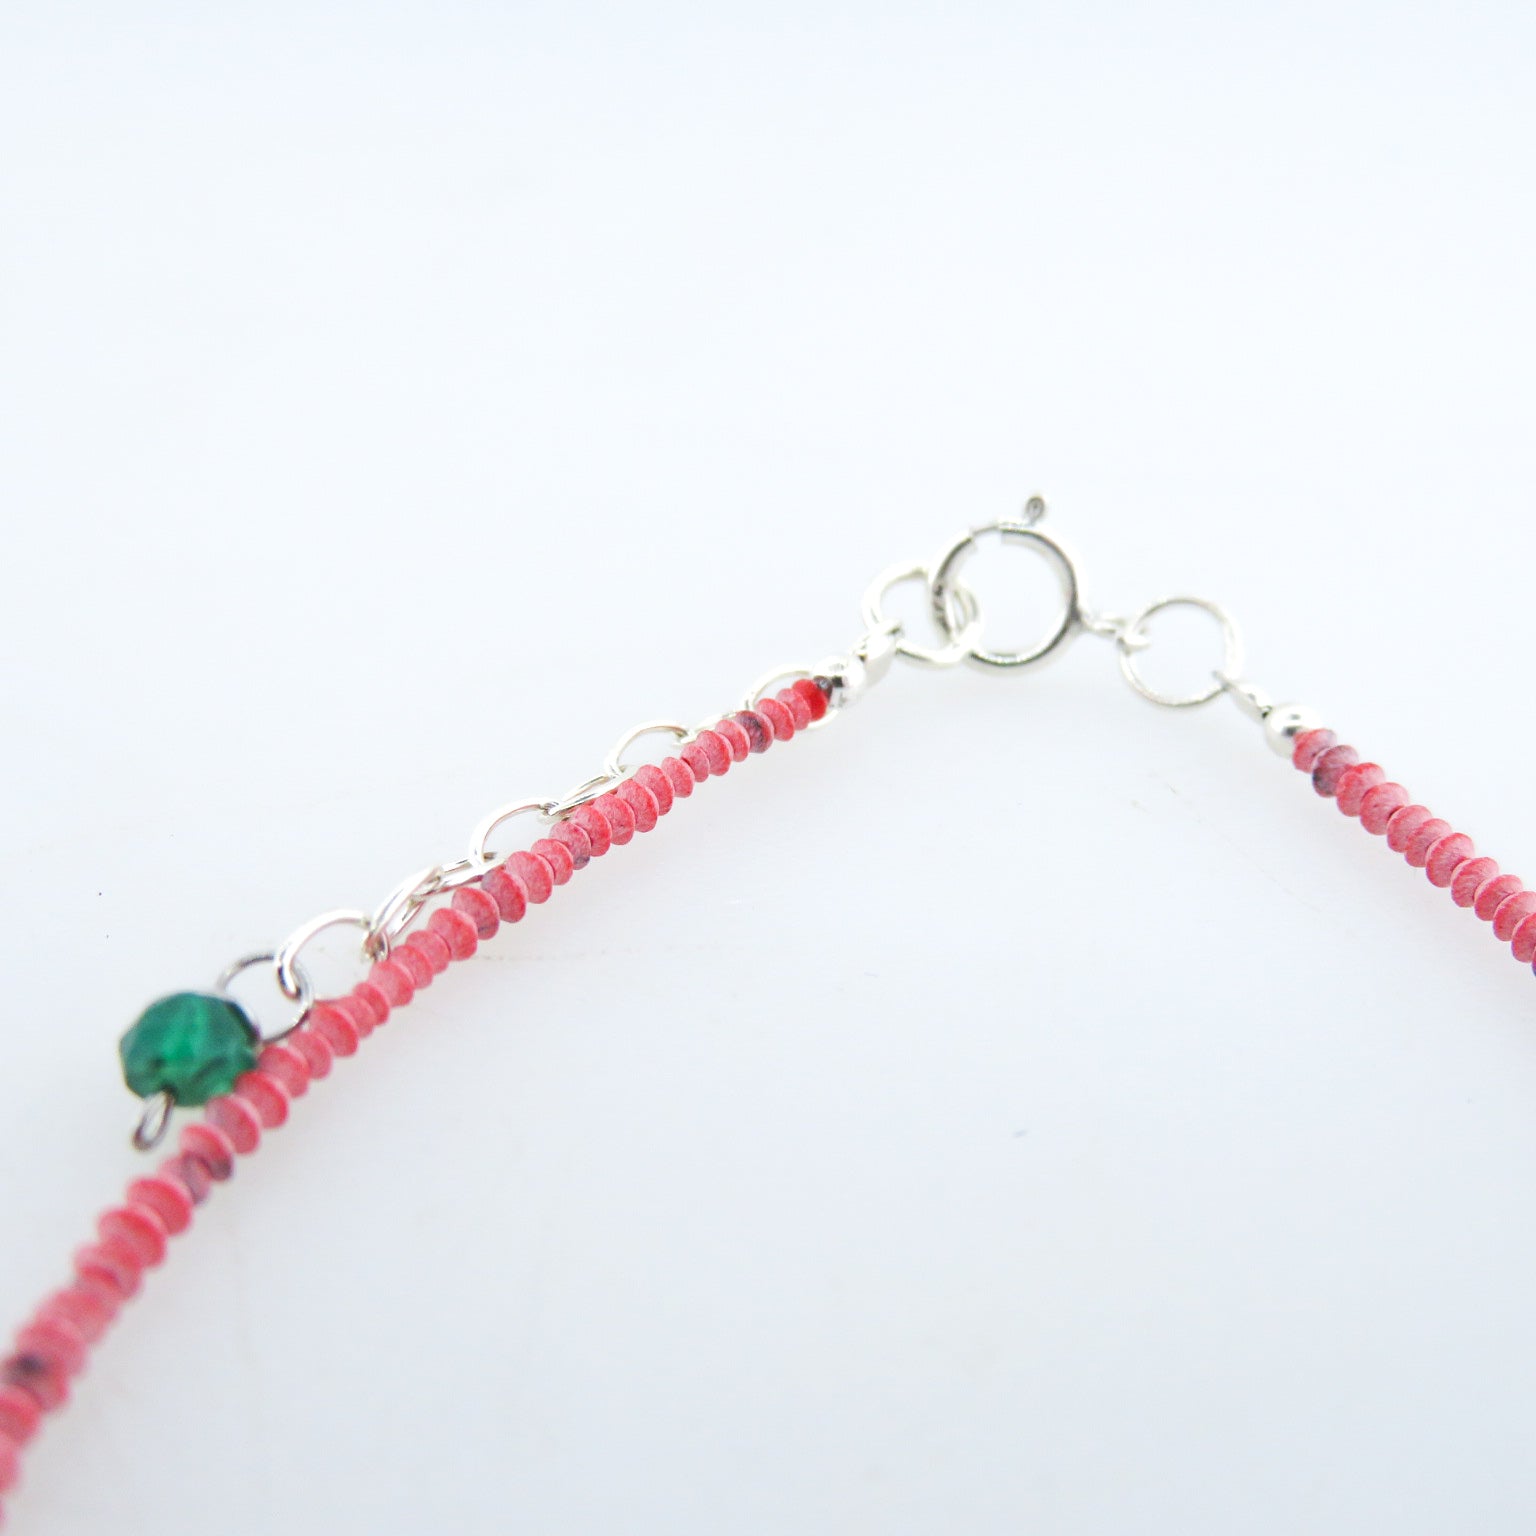 Coral Bracelet with Aquamarine, Green Onyx and Silver Beads